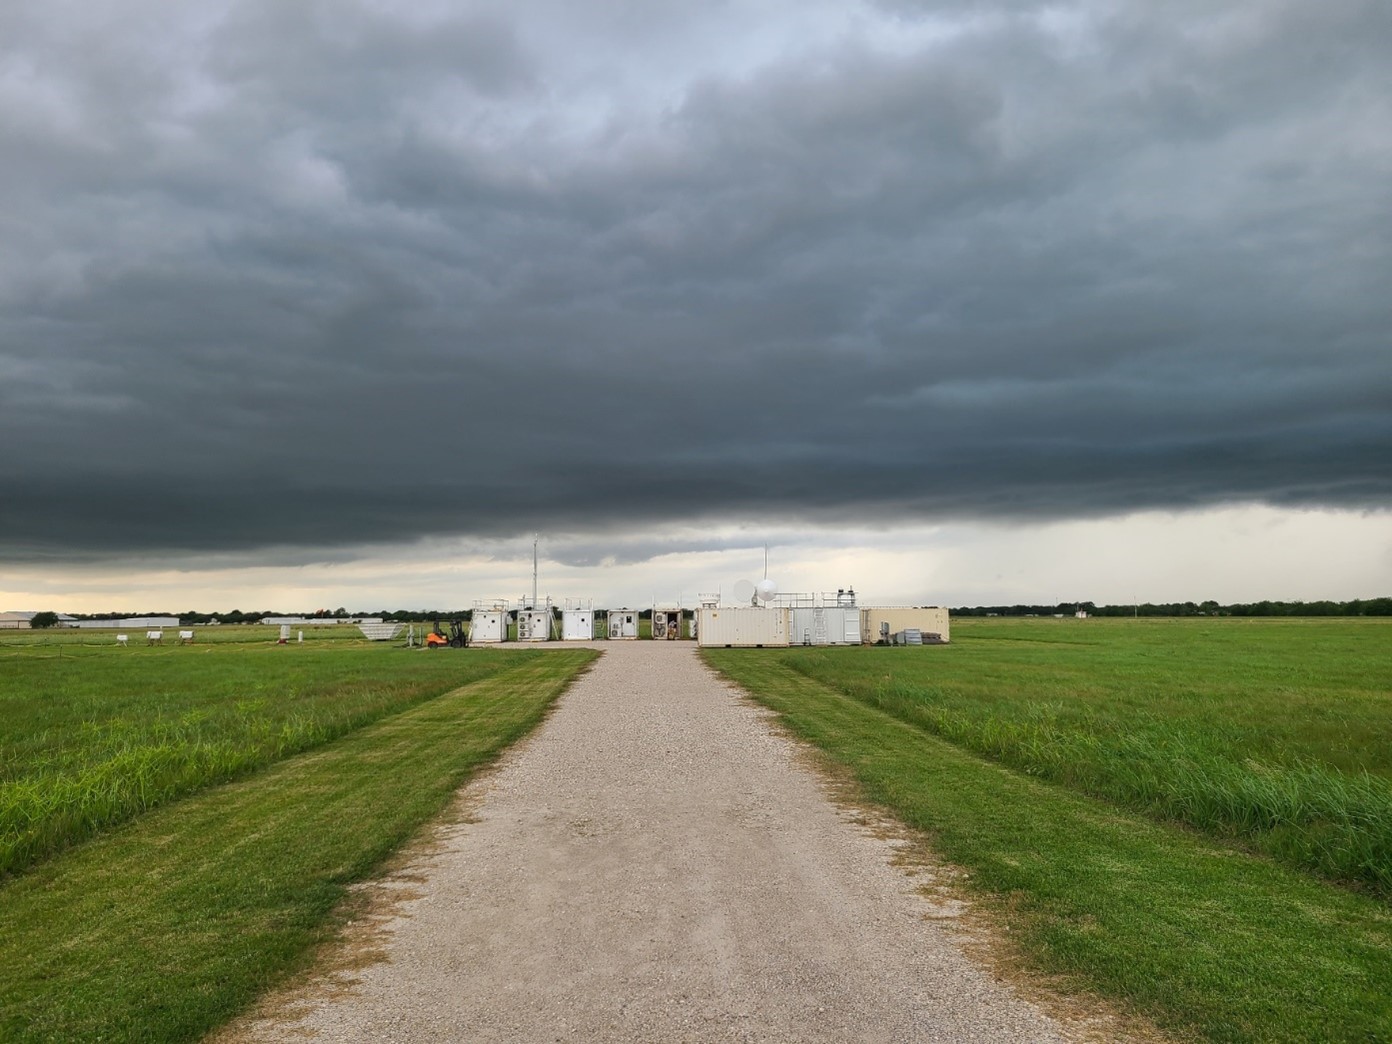 On April 25, 2022, an afternoon storm builds around ARM’s La Porte site. The ARM Mobile Facility is visible at the end of the path. Photo is by Mark Spychala, Hamelmann Communications.